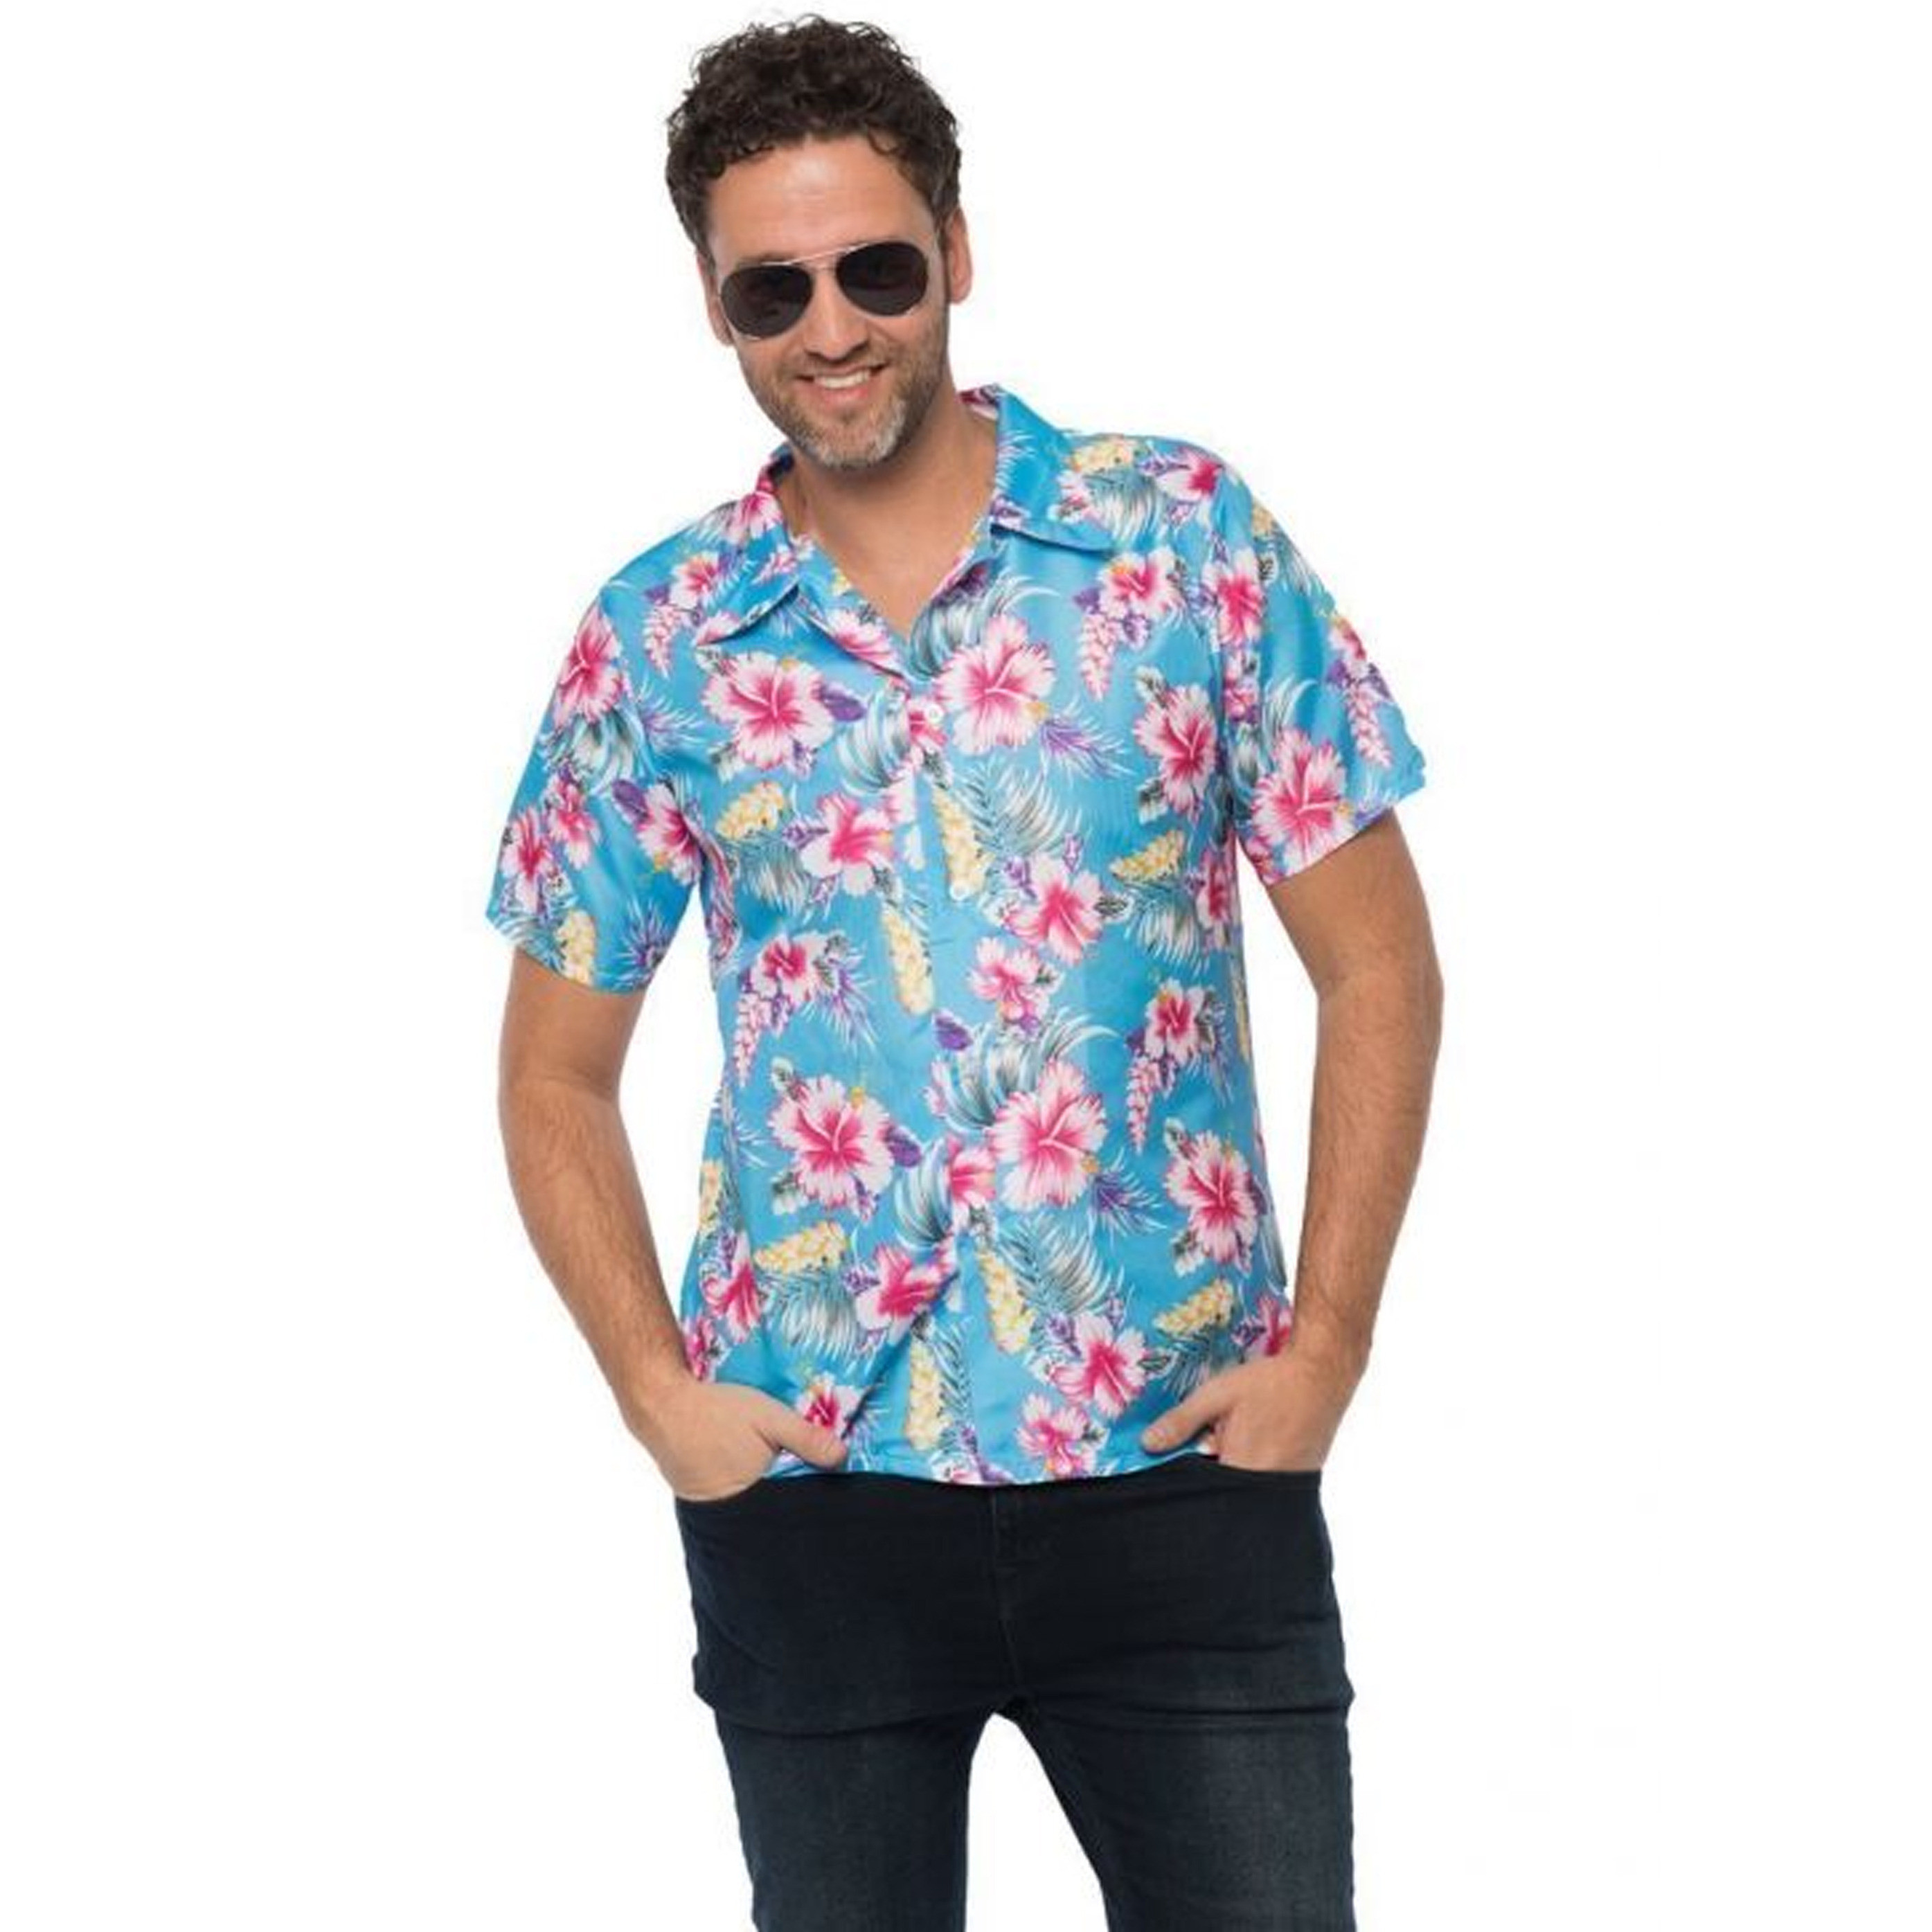 Toppers - Tropical party Hawaii blouse heren - bloemen - blauw - carnaval/themafeest - plus size